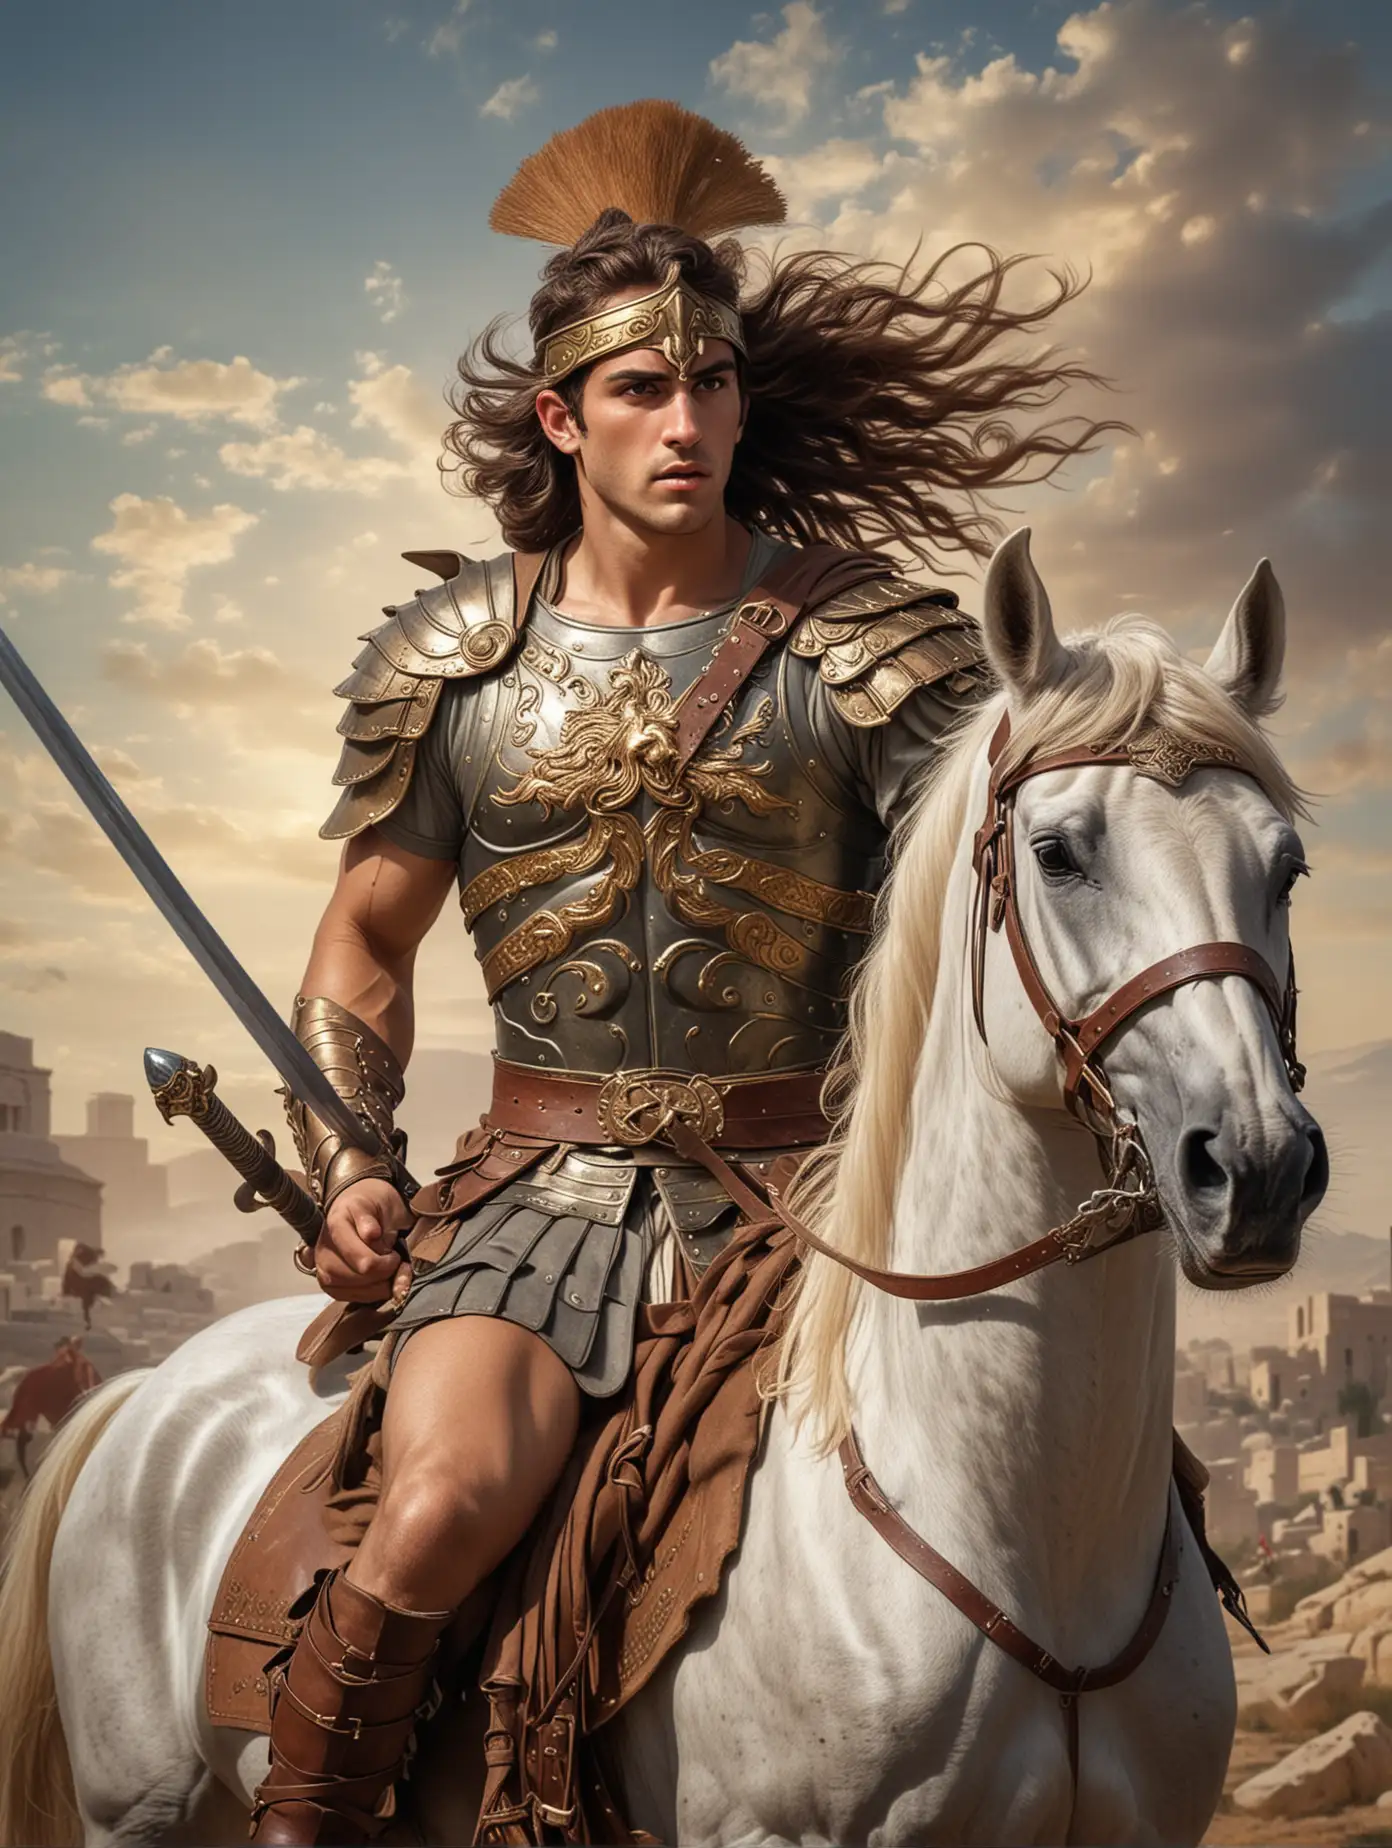 The full view image of a young handsome Greek soldier with fluttering hair in ancient Greek armor without a helmet on horseback, wearing a plumed helmet, brandishing his sword and fighting a dragon under the horse's legs